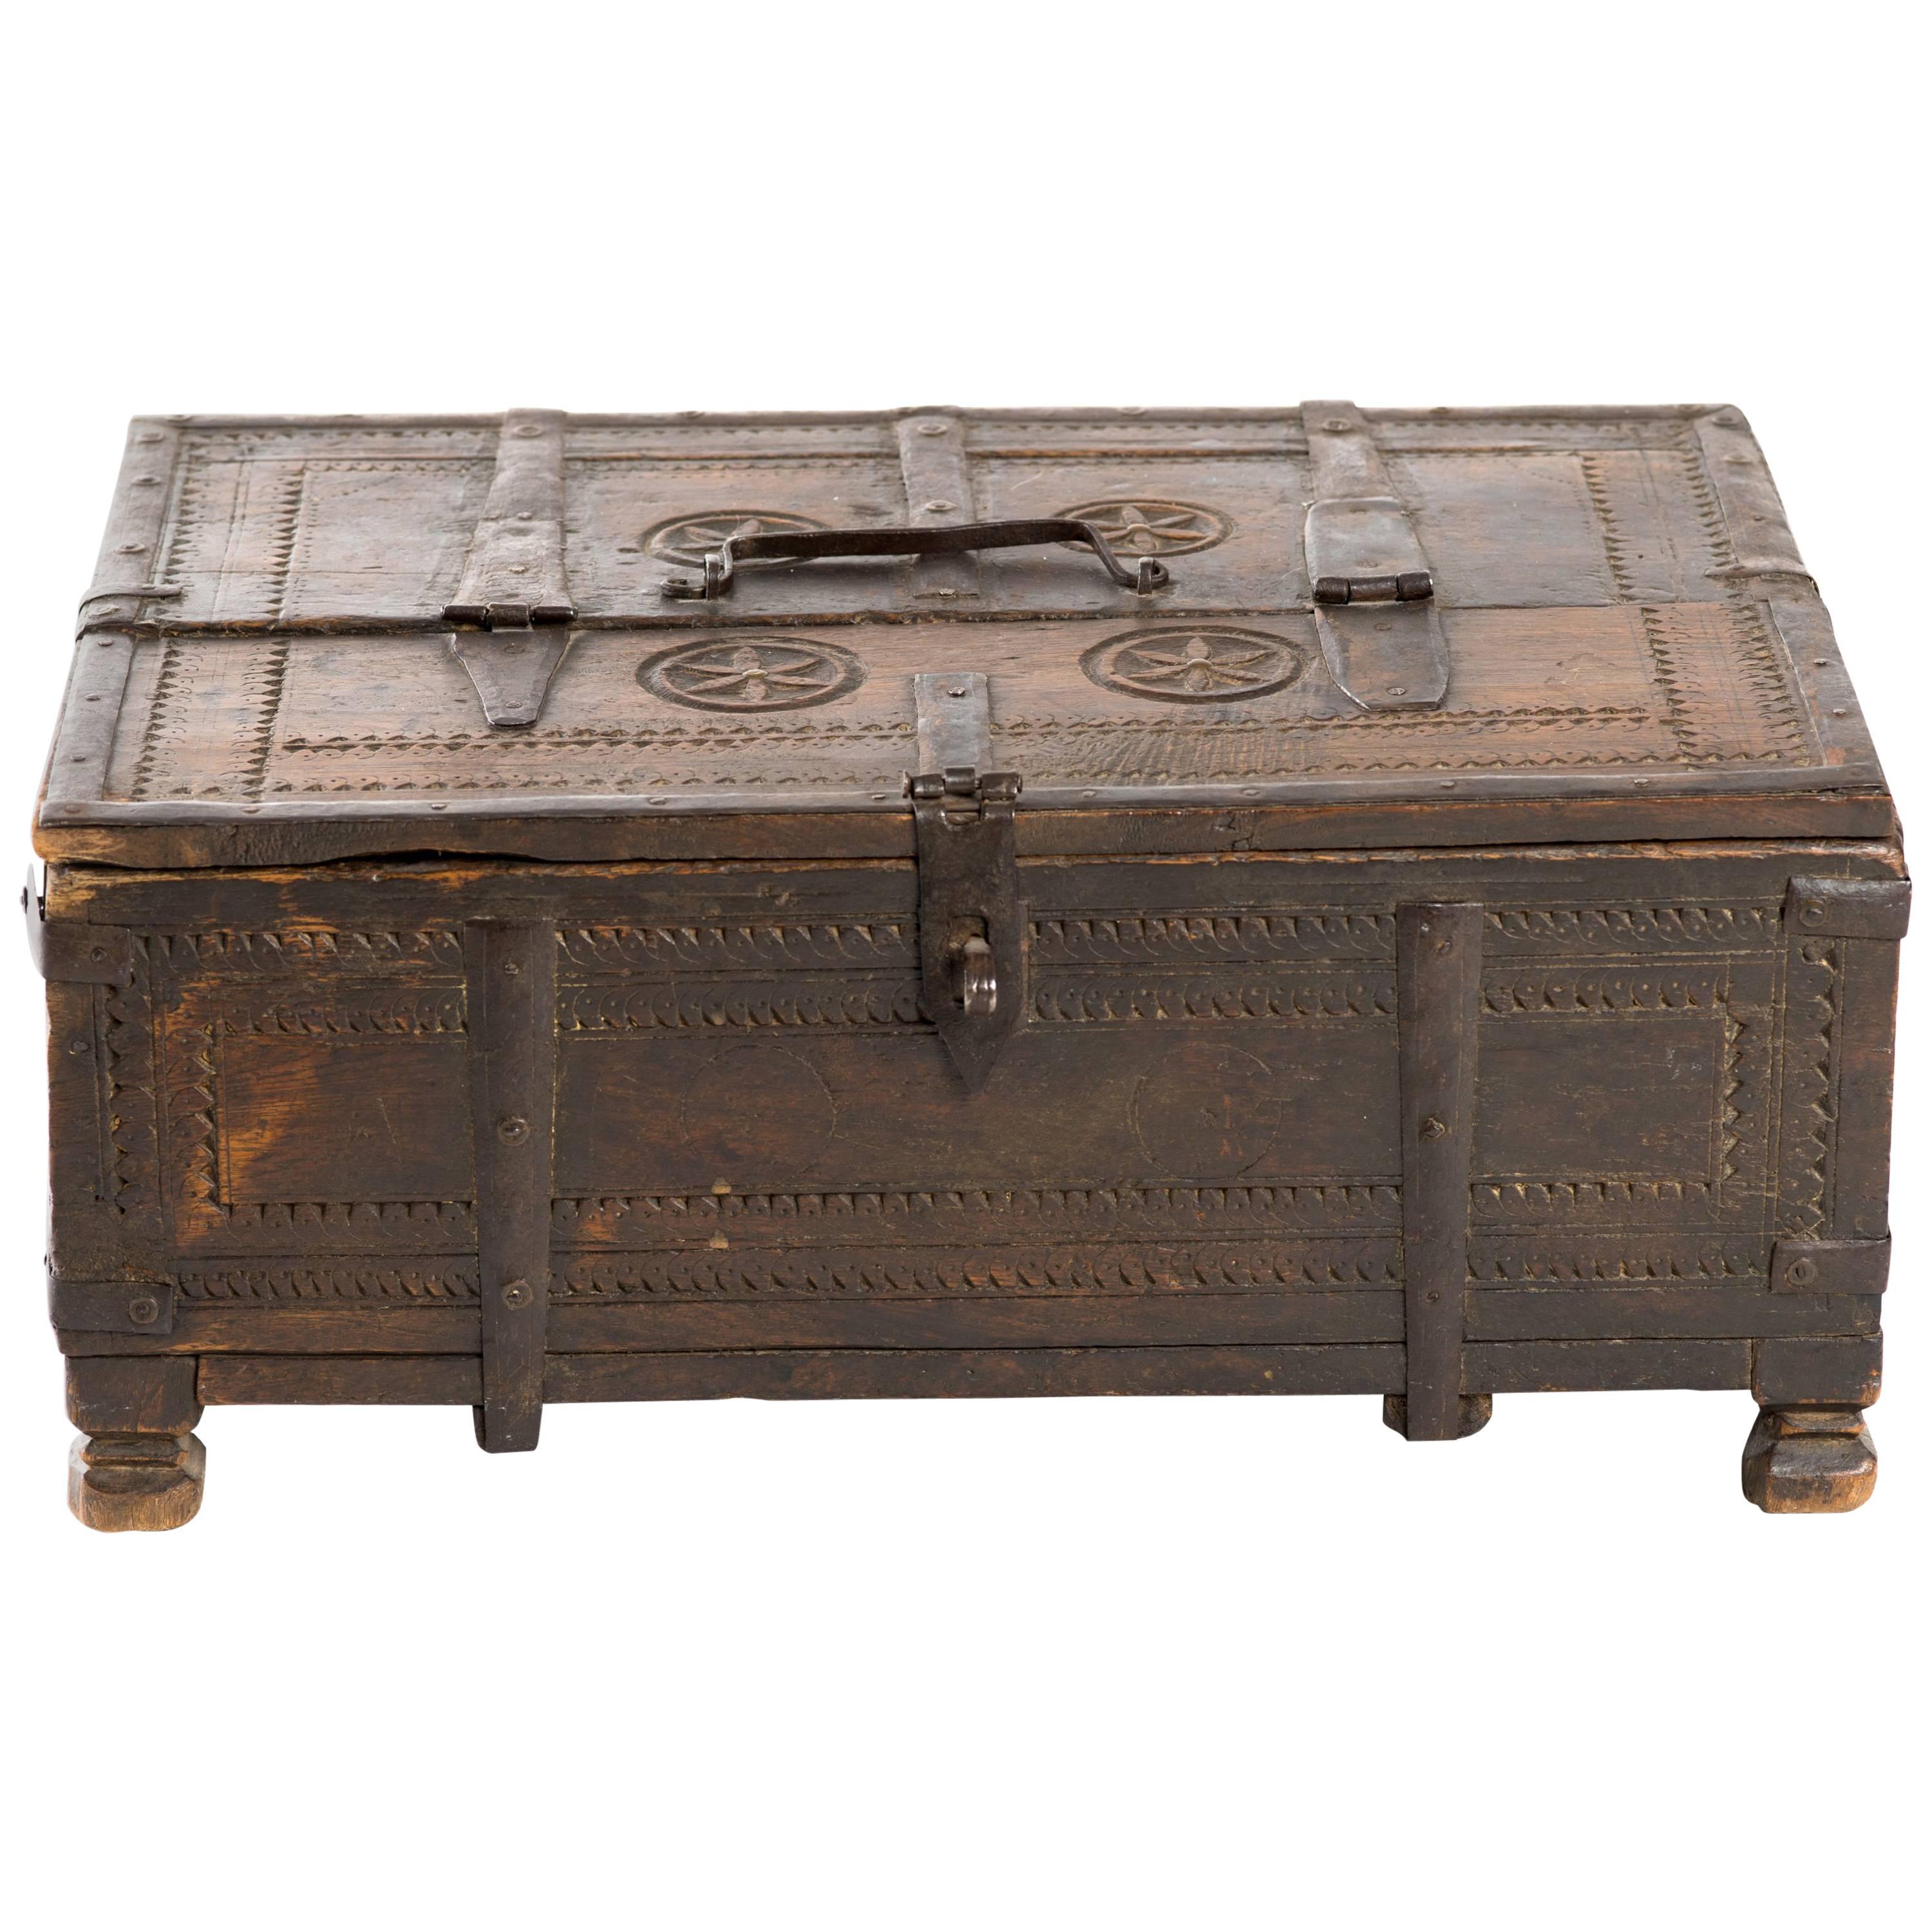 Early 20th Century Indian Carved Wood Storage Chest Box